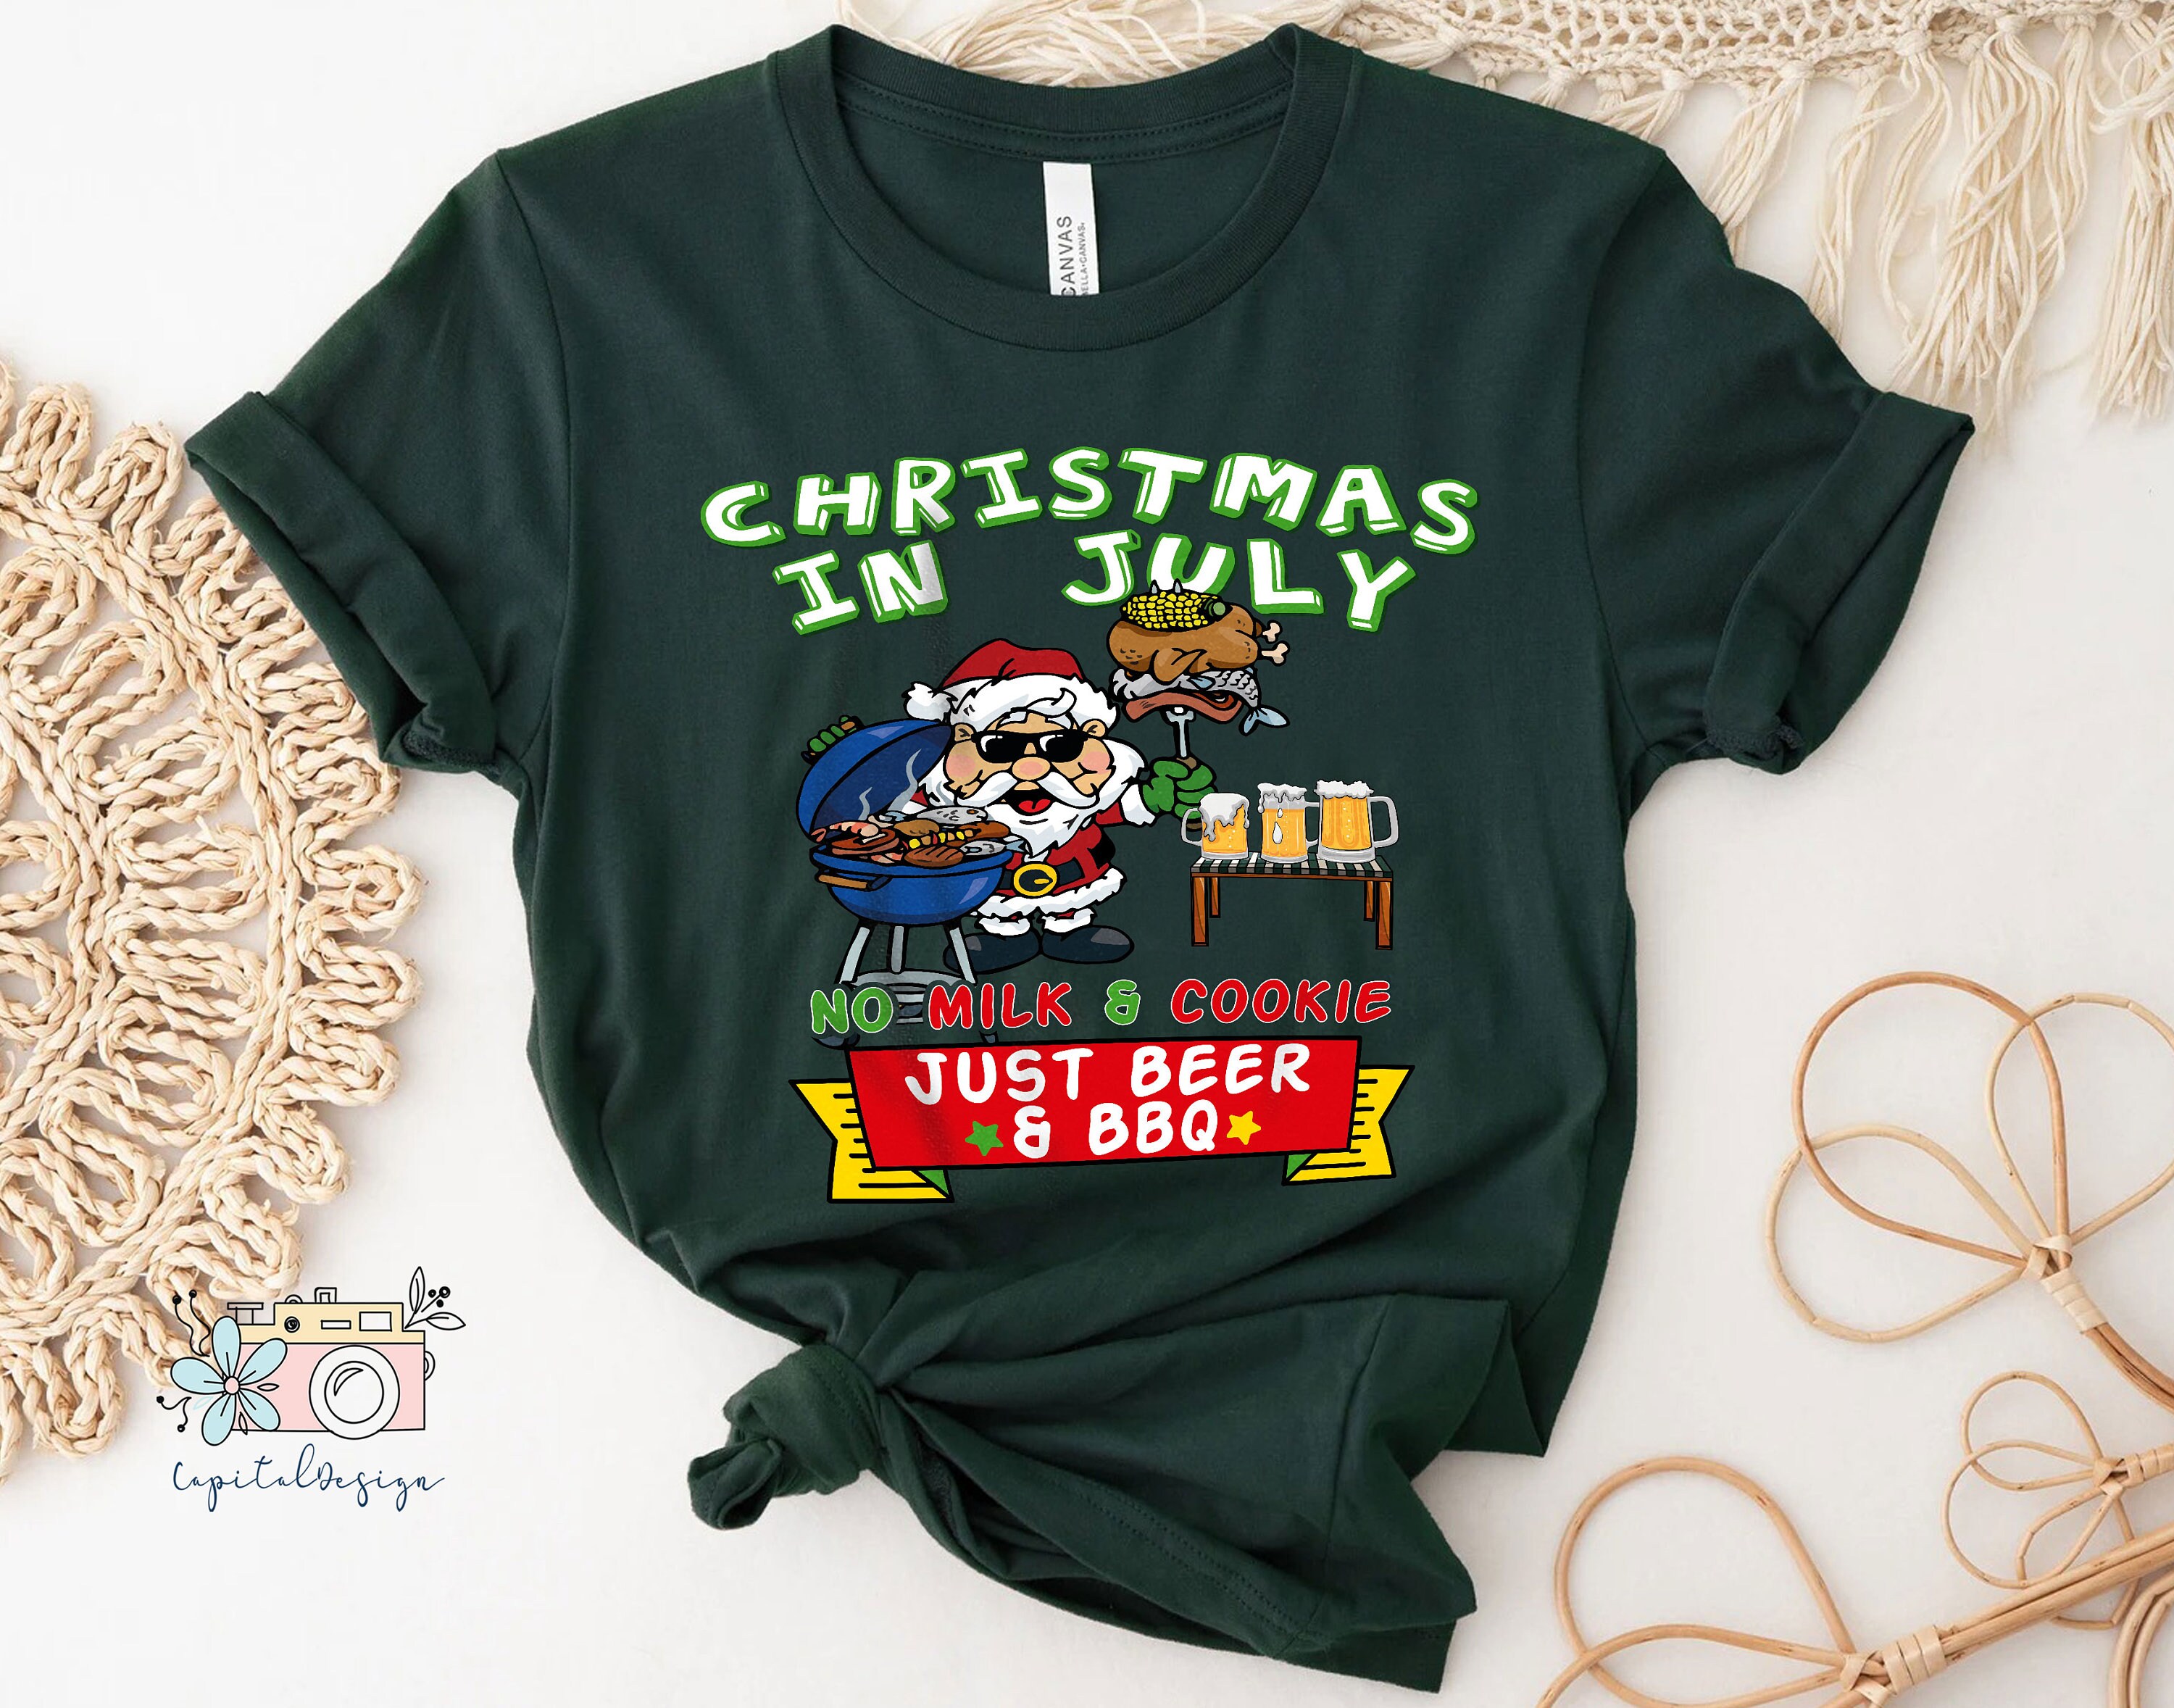 Matching Beach Summer Vacation Shirt No Milk and Cookies Just Beer and Bbq Shirt Funny Christmas in July Dad Mom Shirt